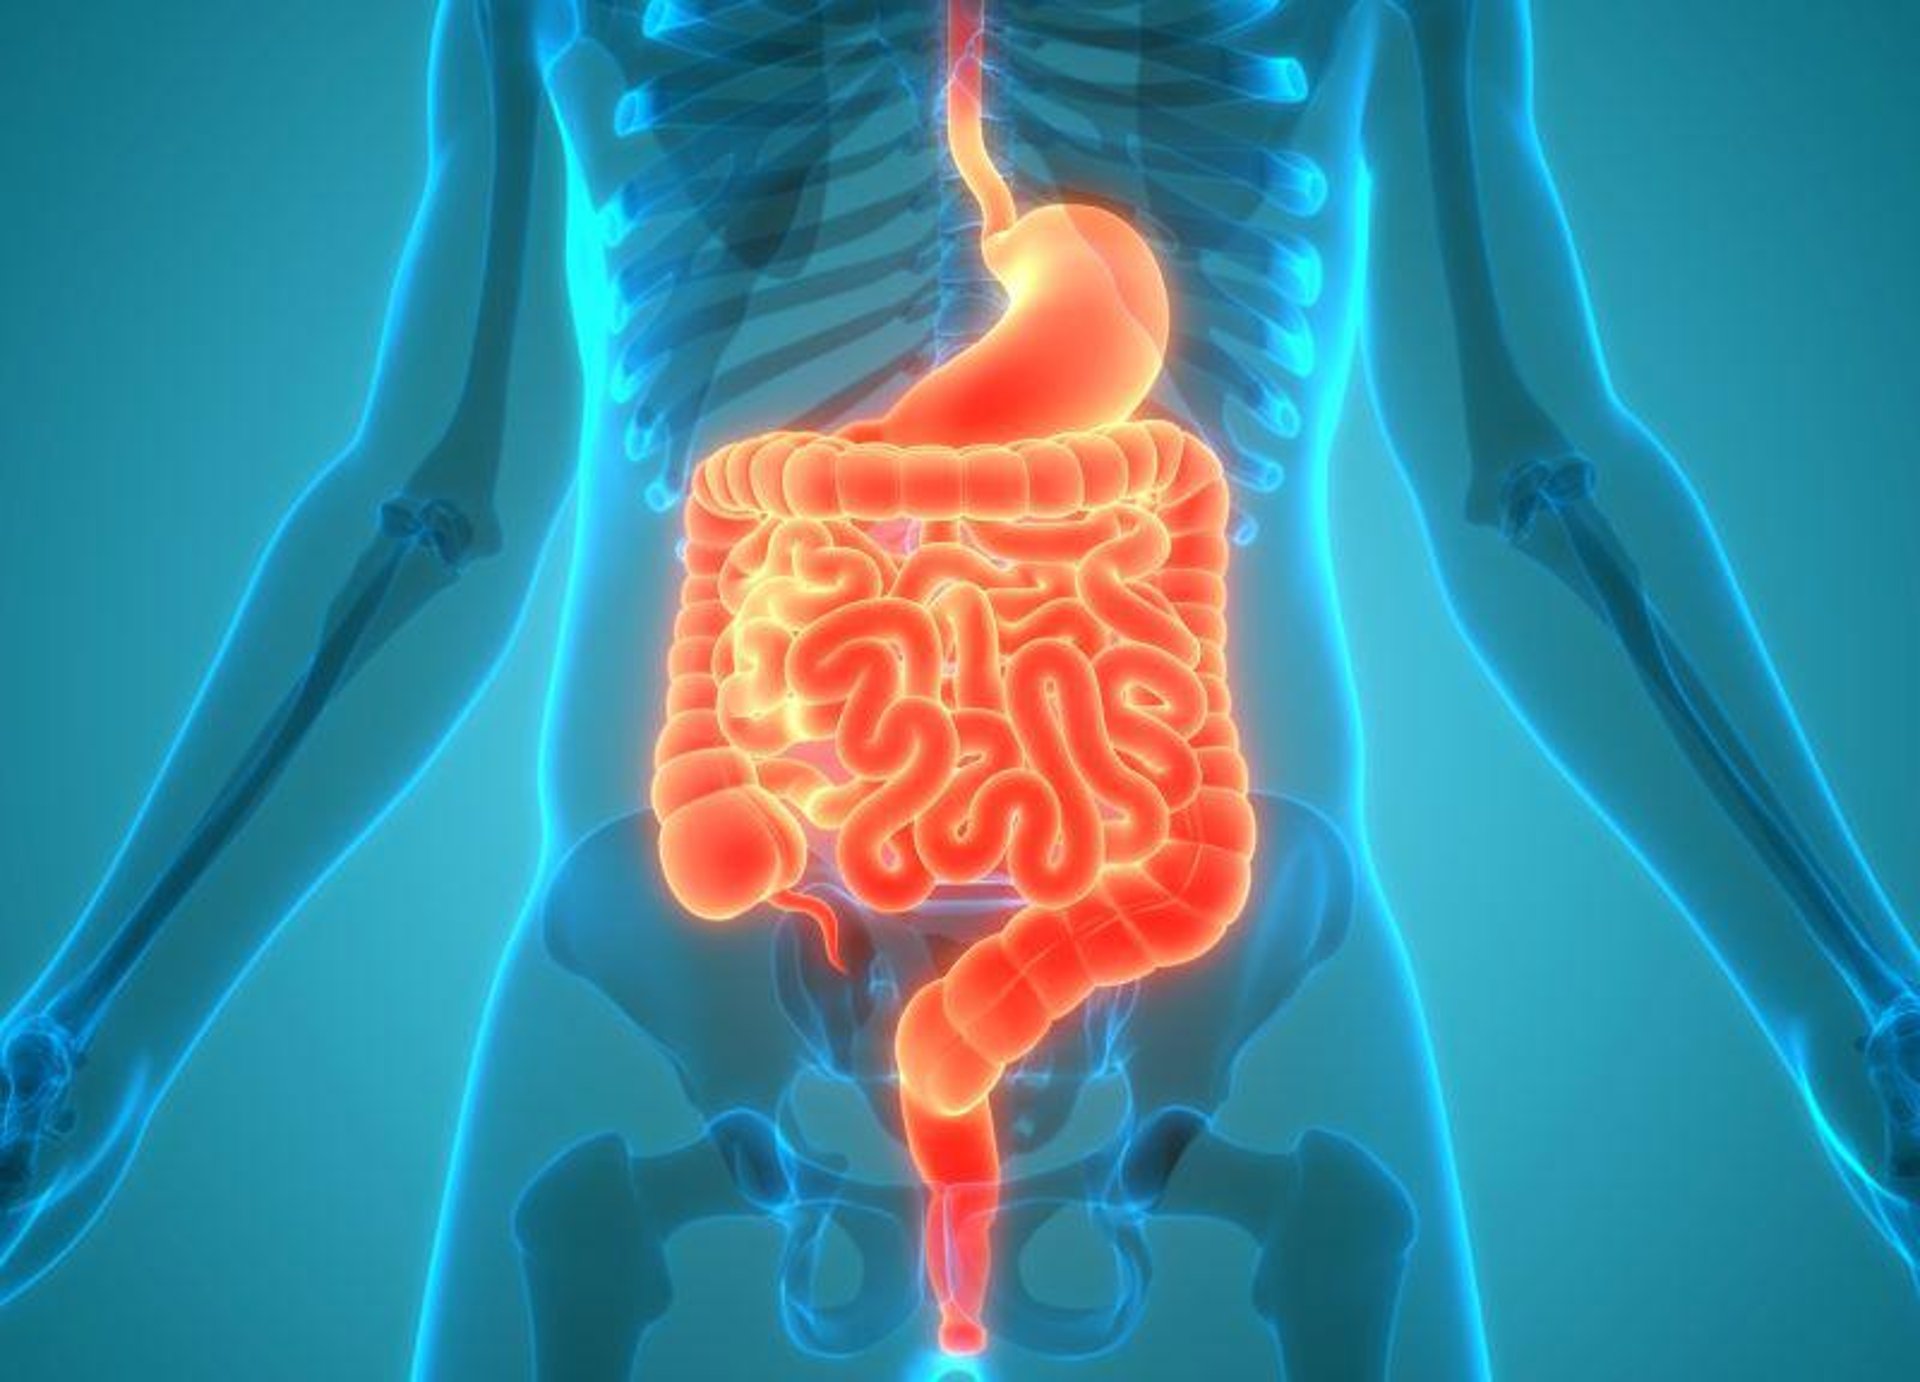 News Picture: Digestive Organs Vary Widely Between People, Study Finds